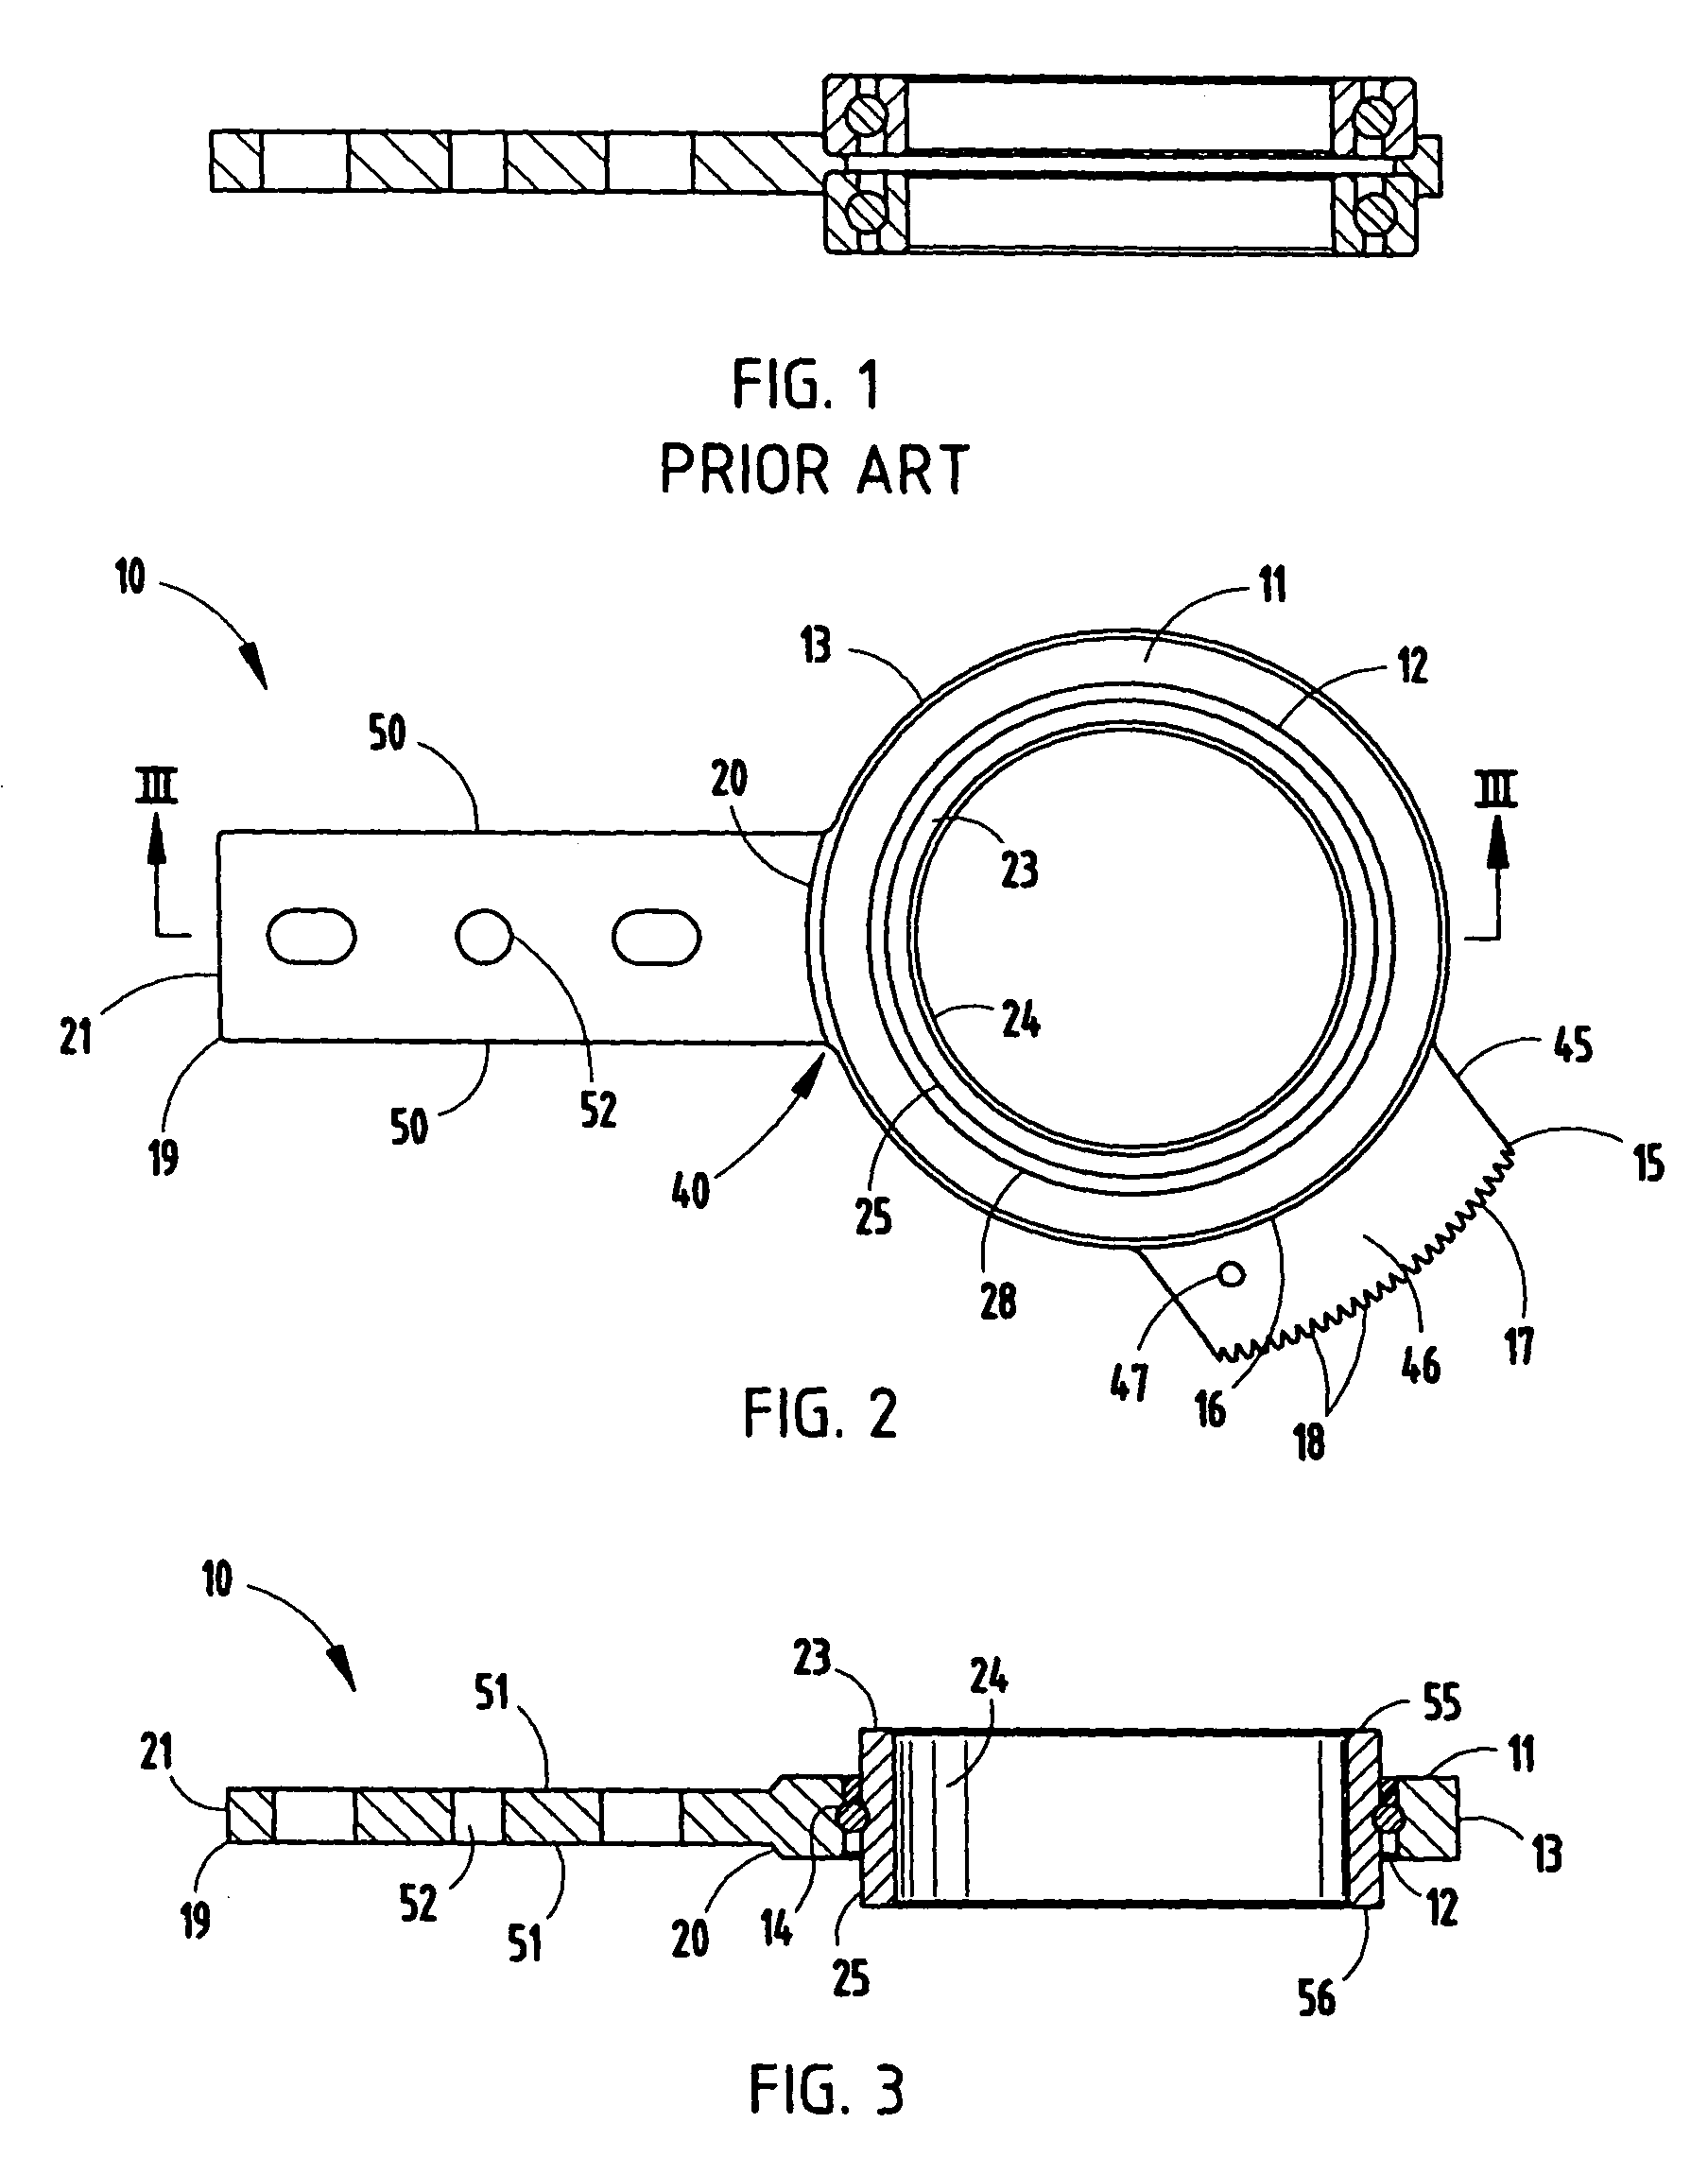 Method for making a pivot arm assembly for semiconductor wafer handling robots